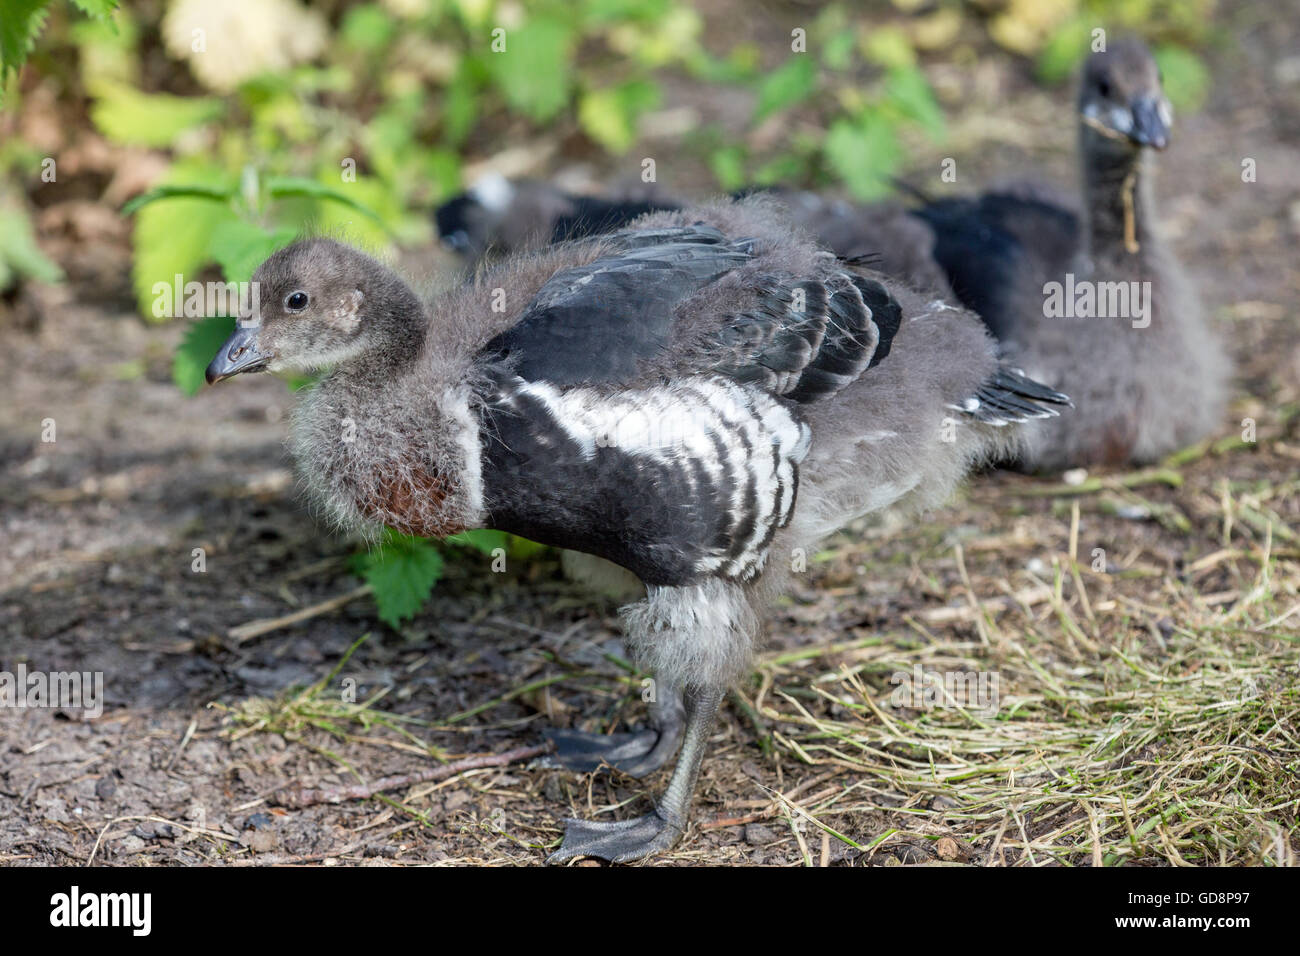 Red-breasted Goose (Branta ruficollis). Gosling or young aged 28 days old. Stock Photo